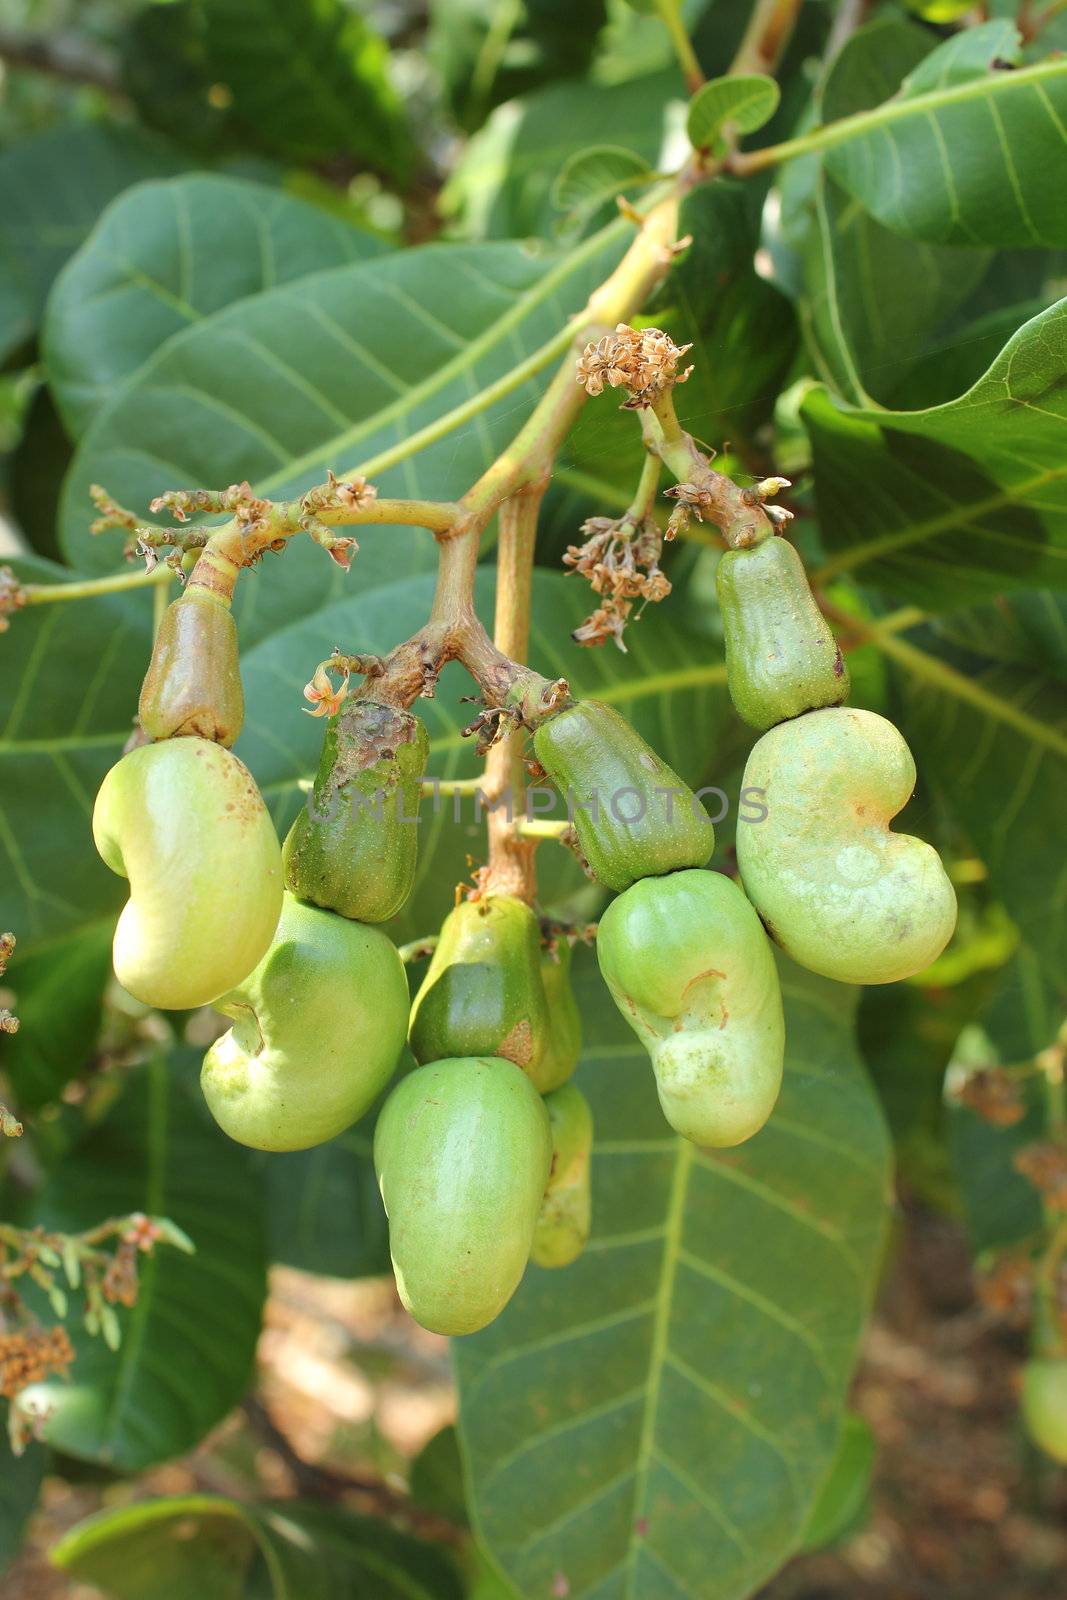 Cashew nuts growing on tree at Thailand